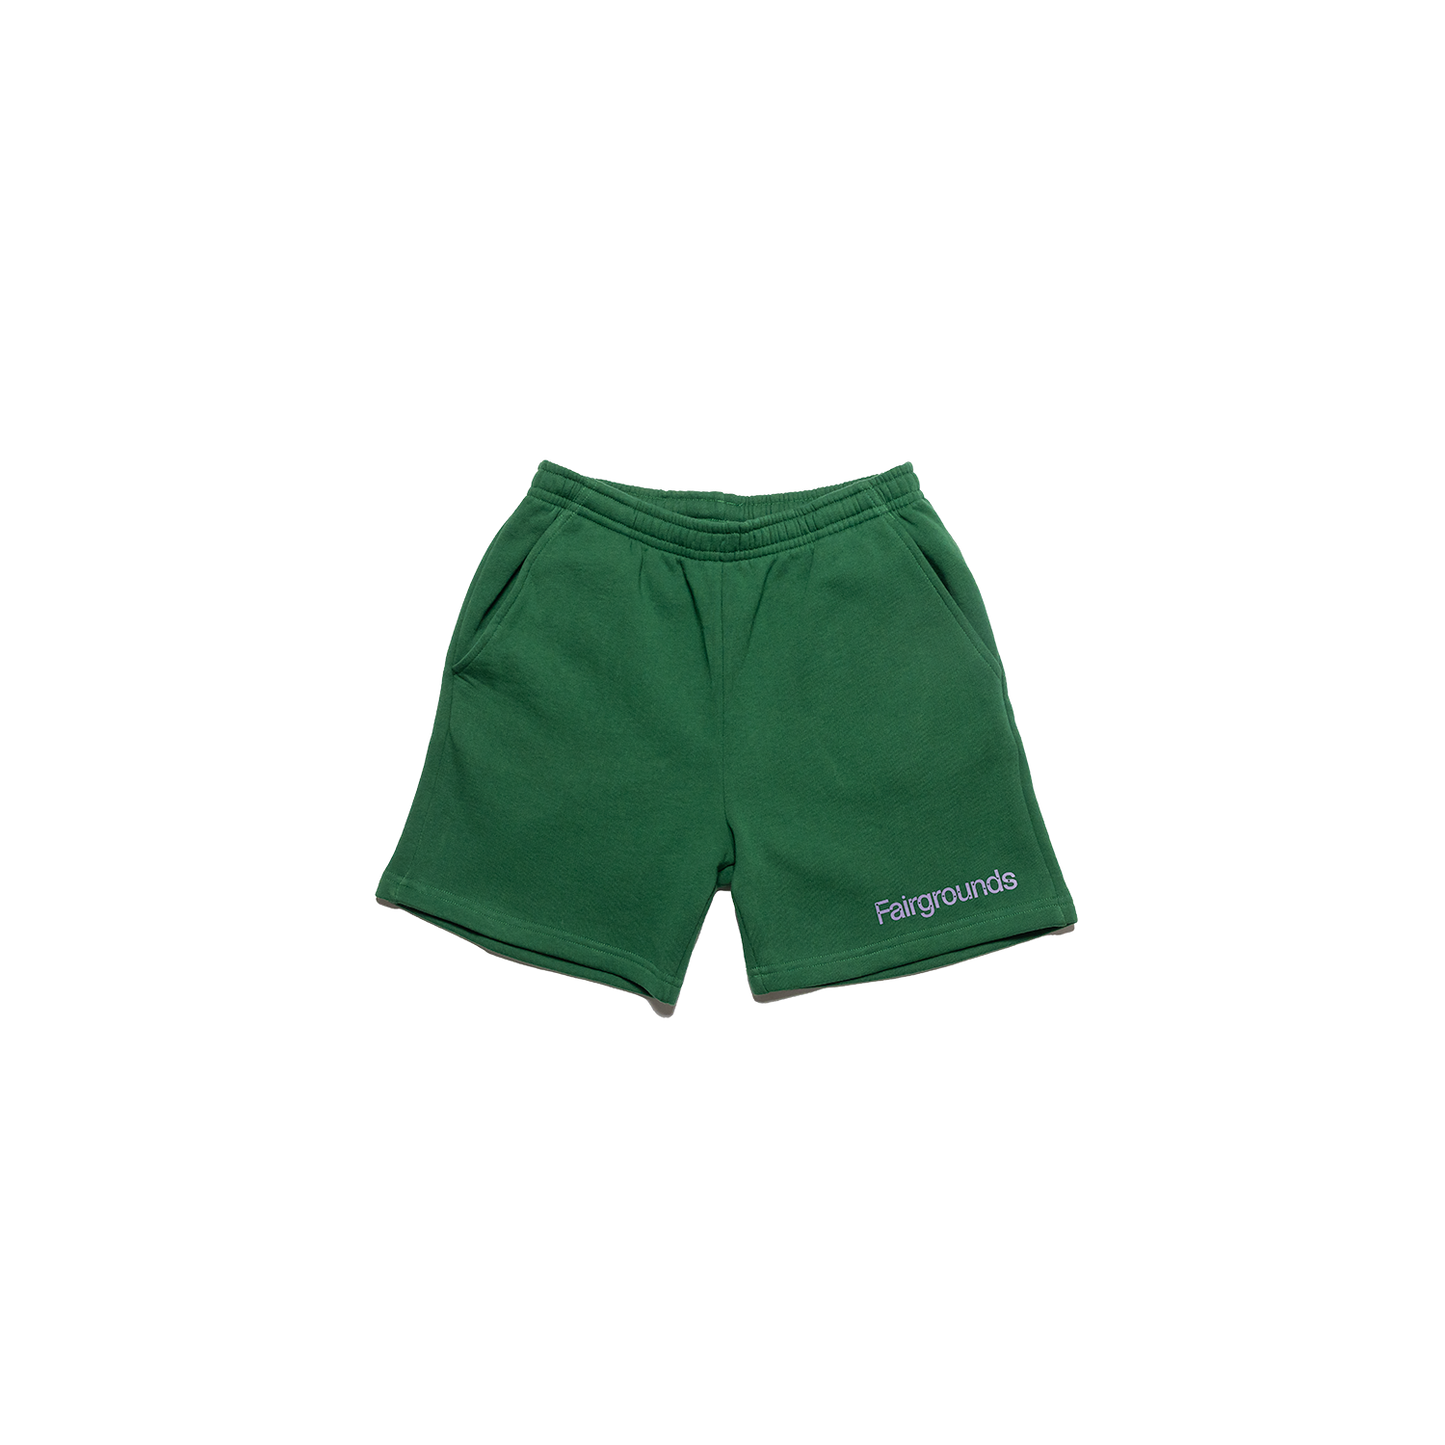 Ace Shorts - Green Space